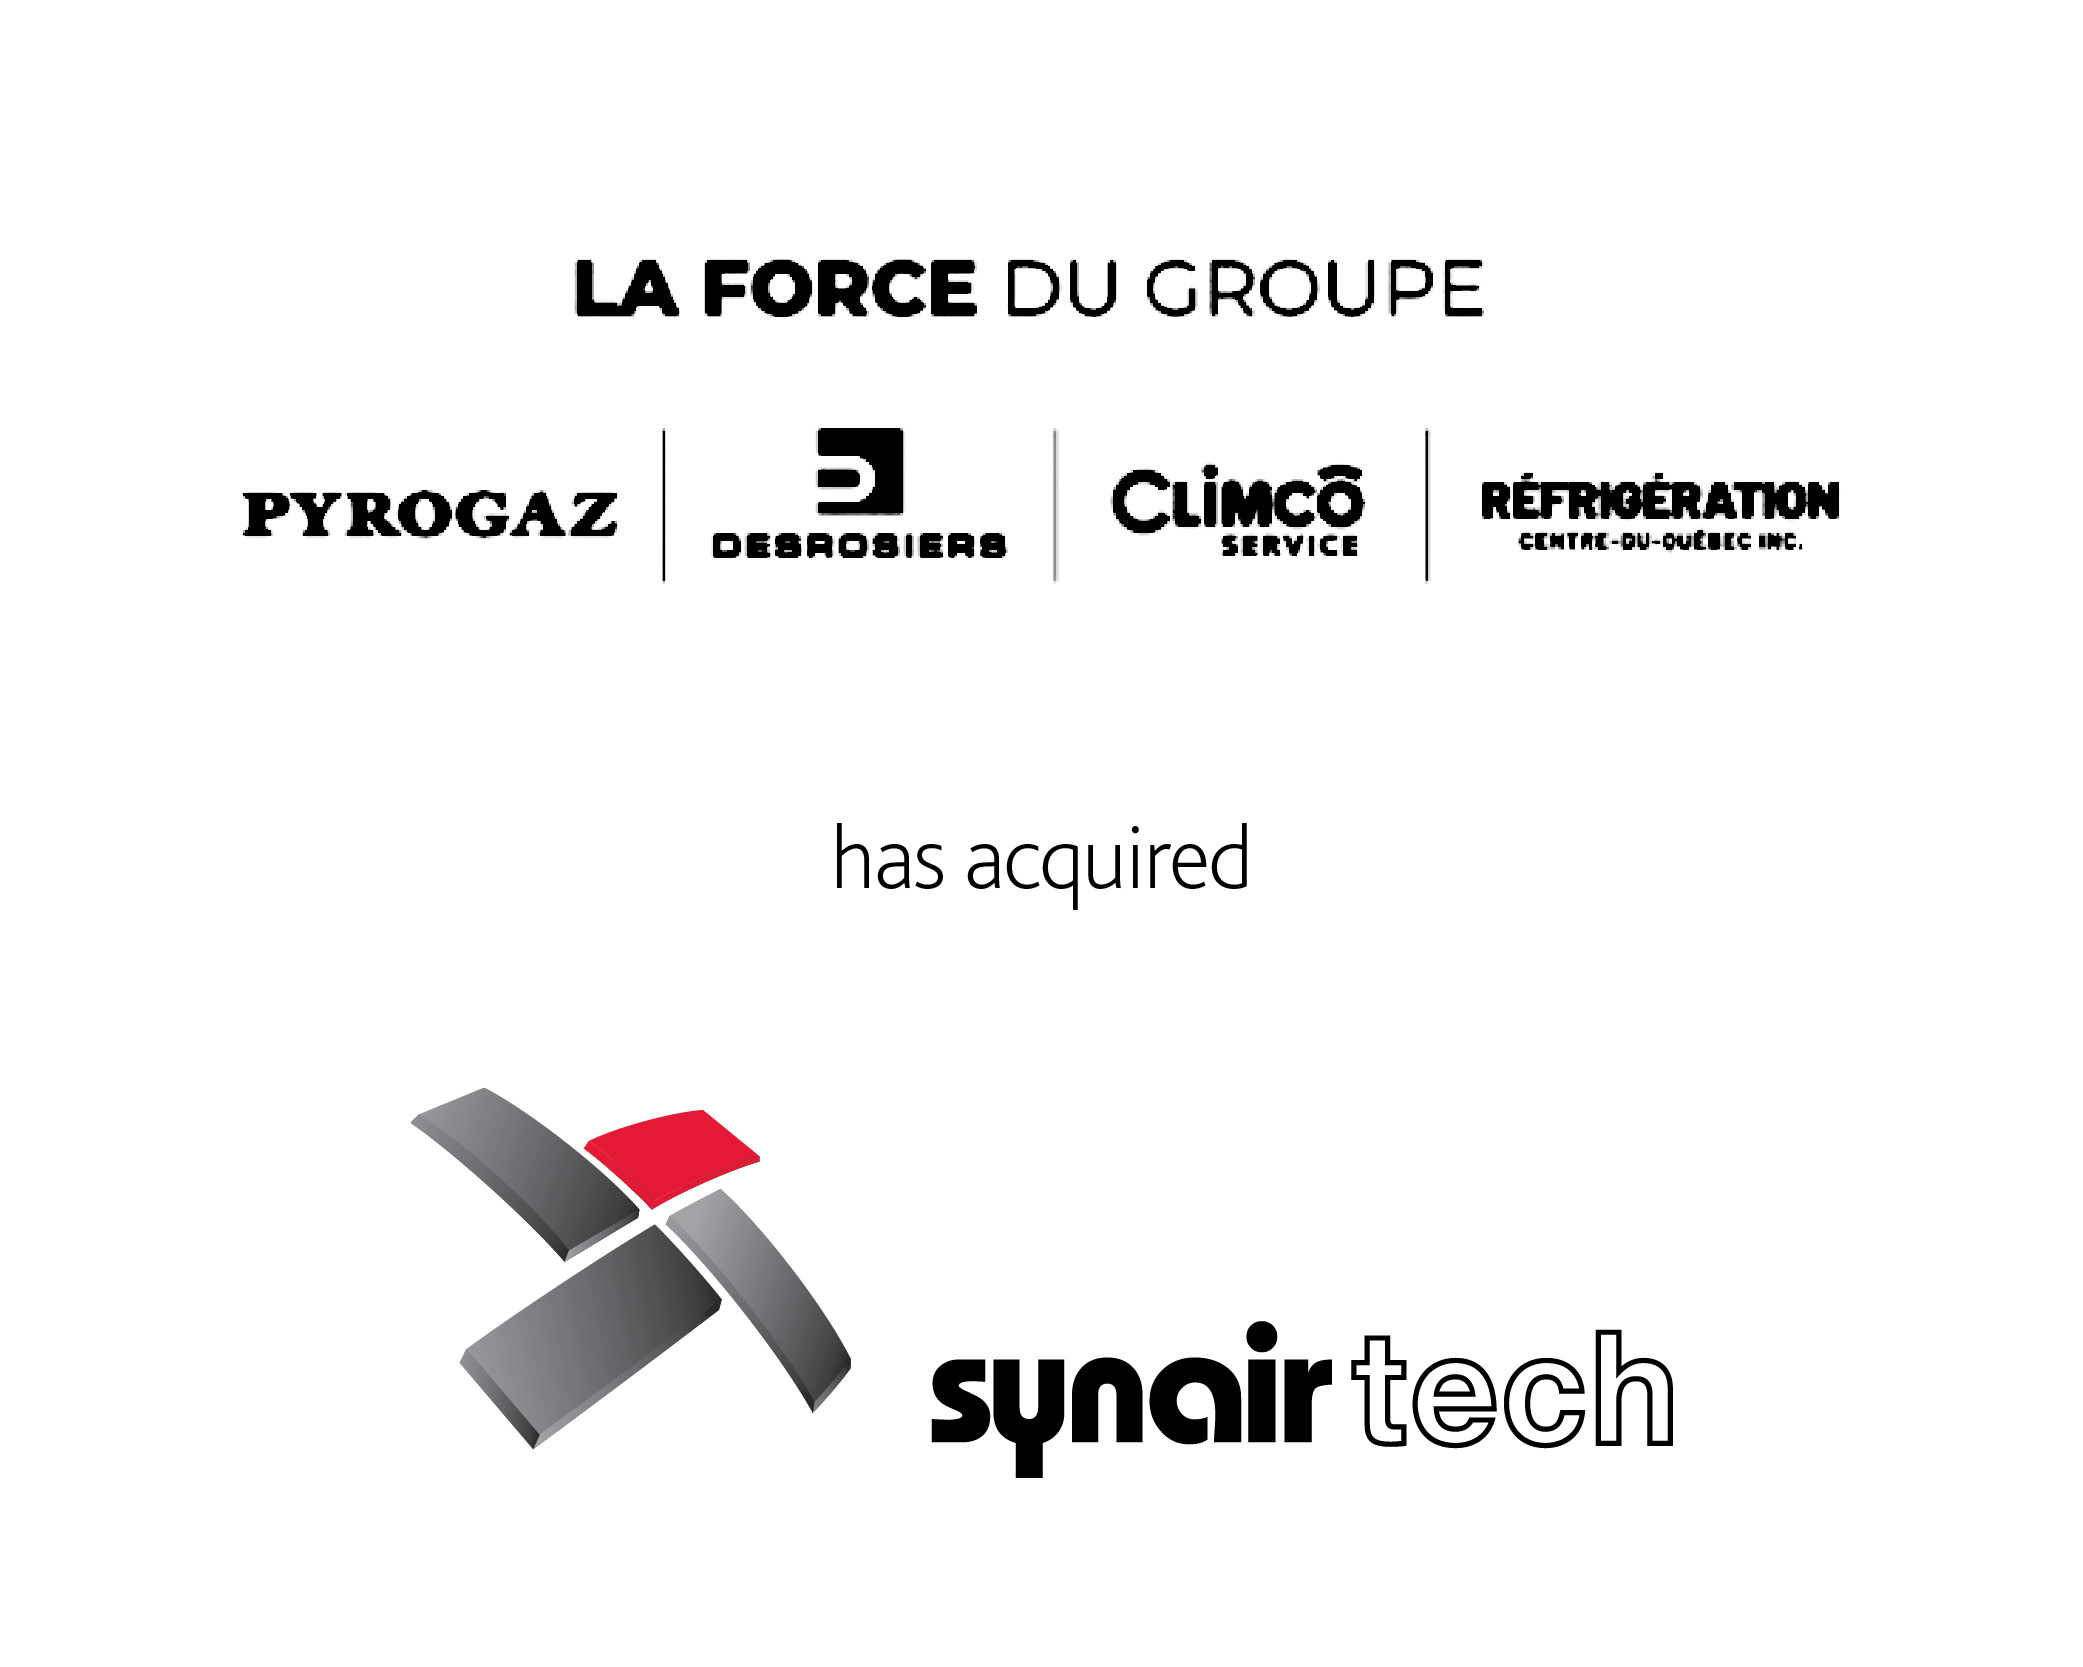 Synaire Tech acquires MNP Finance: A significant merger in the tech and finance sectors.